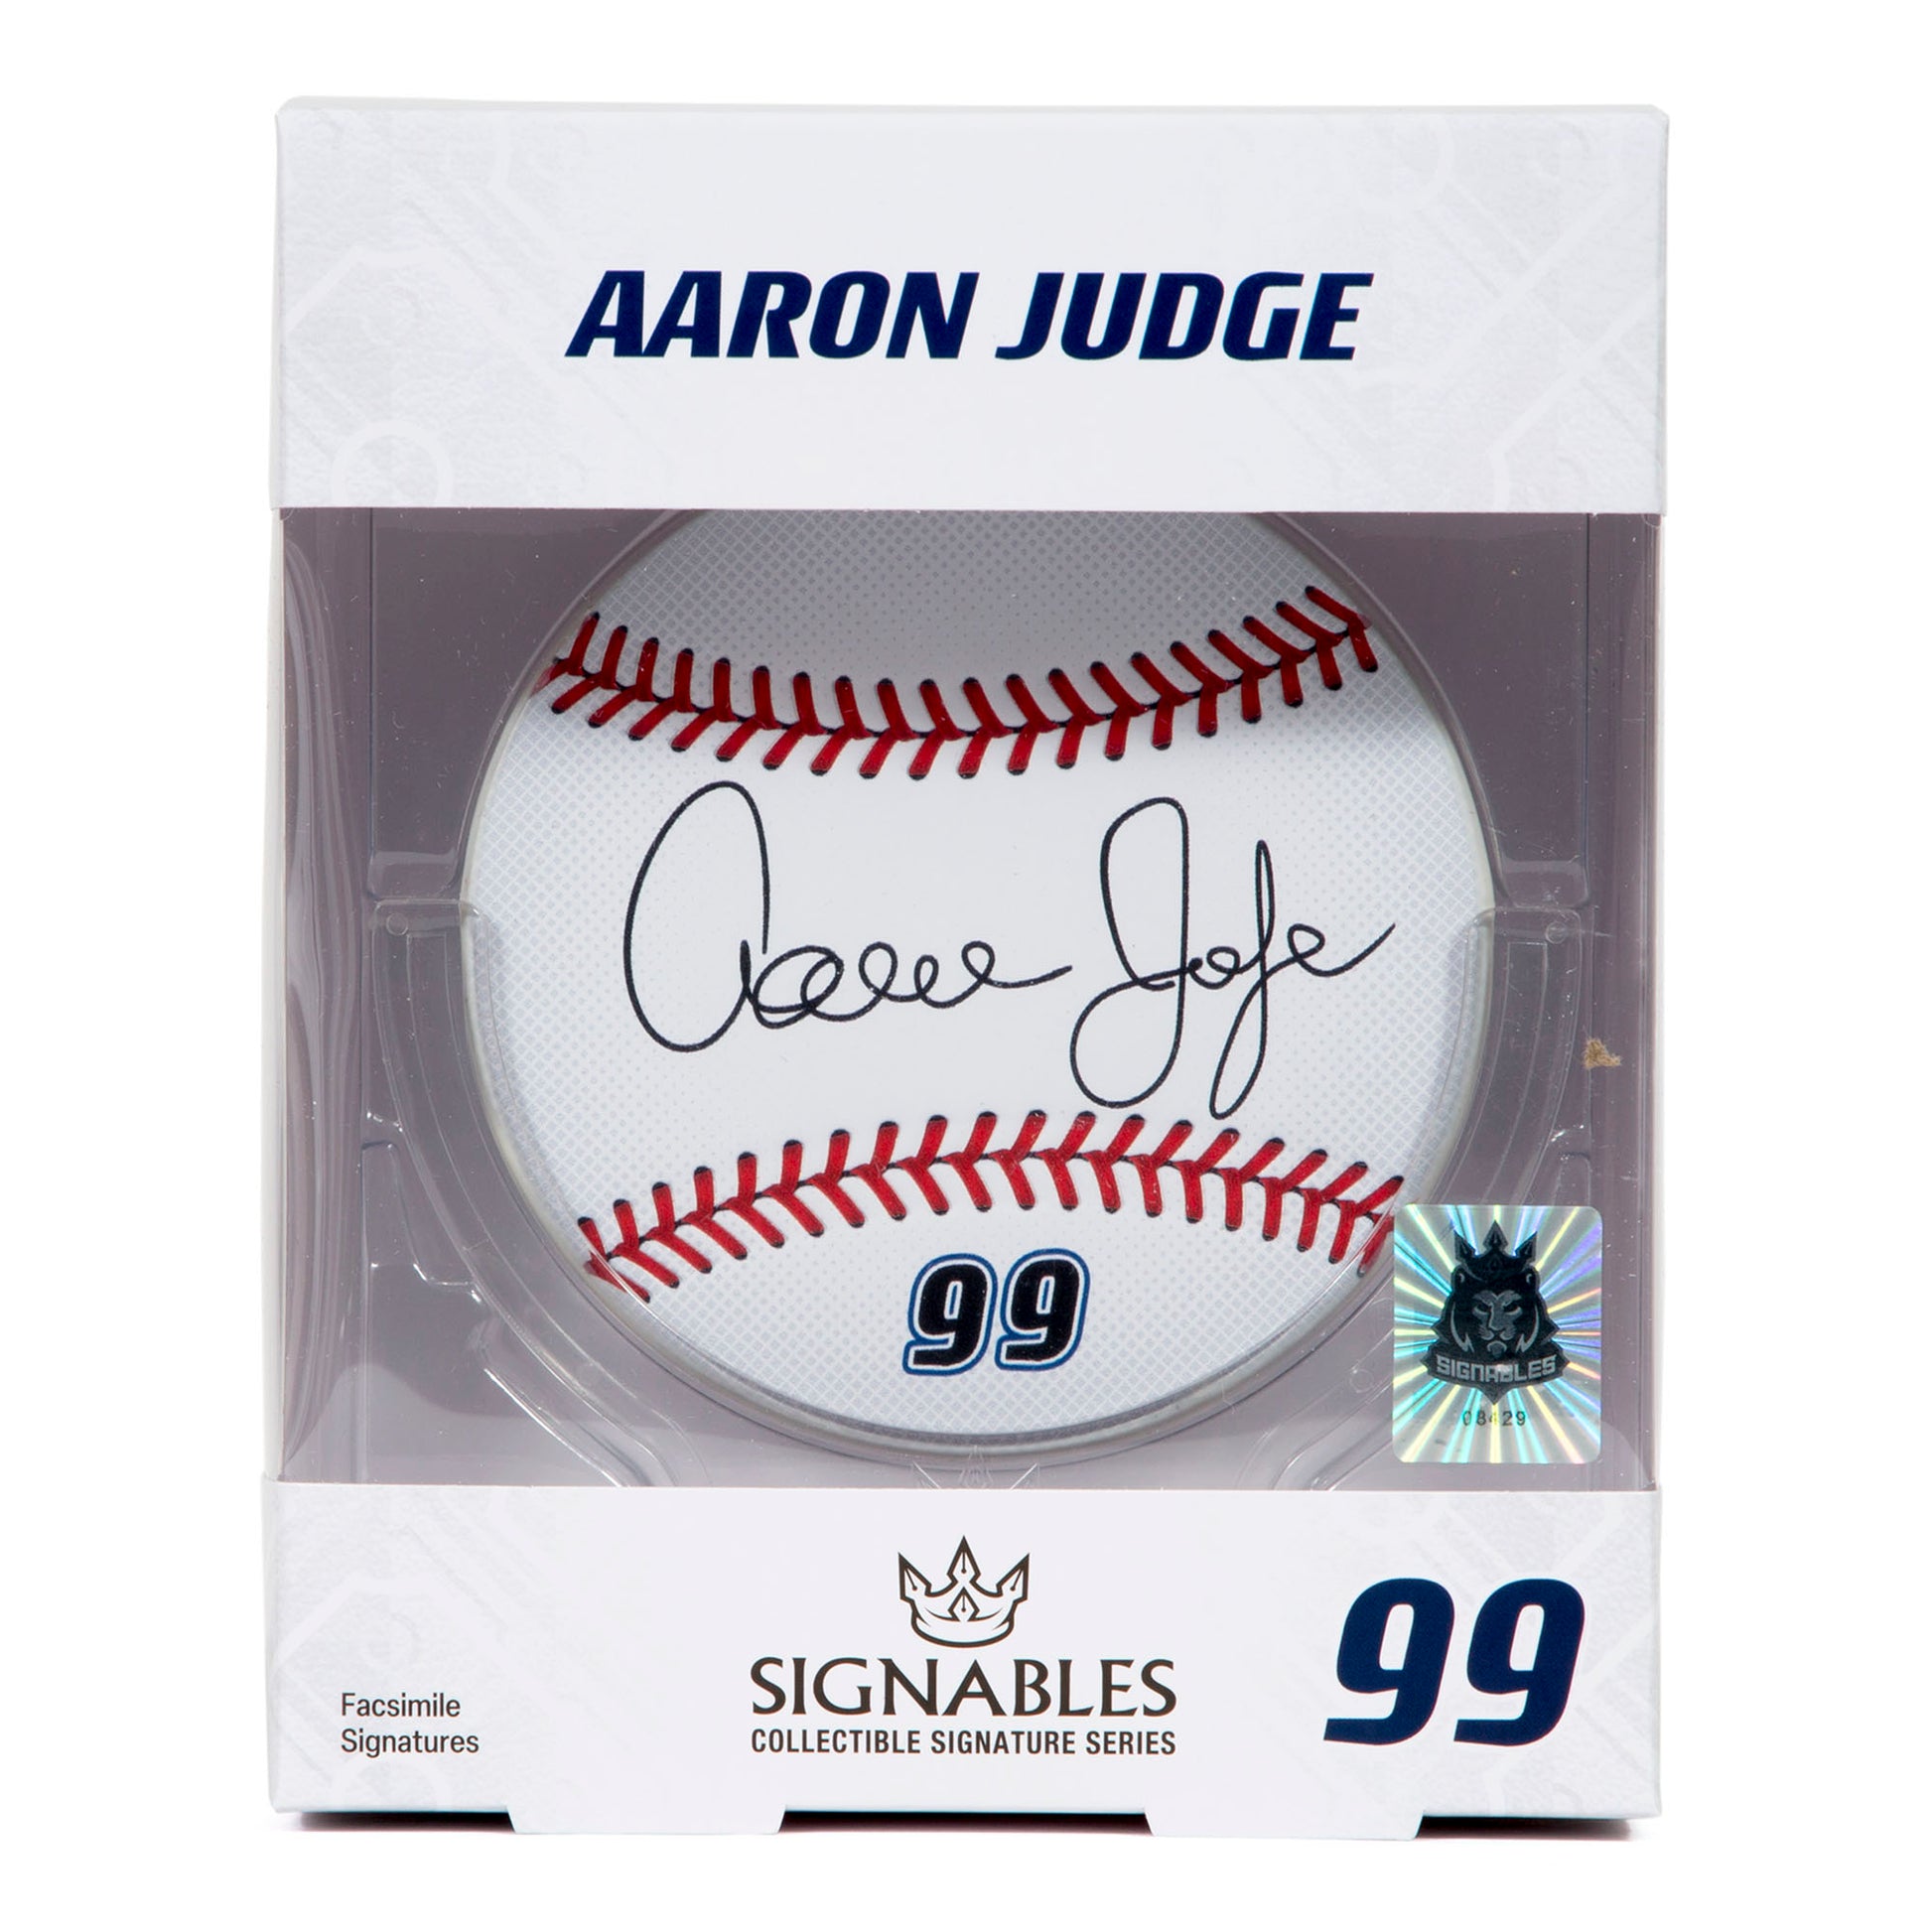 Signables Aaron Judge New York Yankees Signature Series Collectible